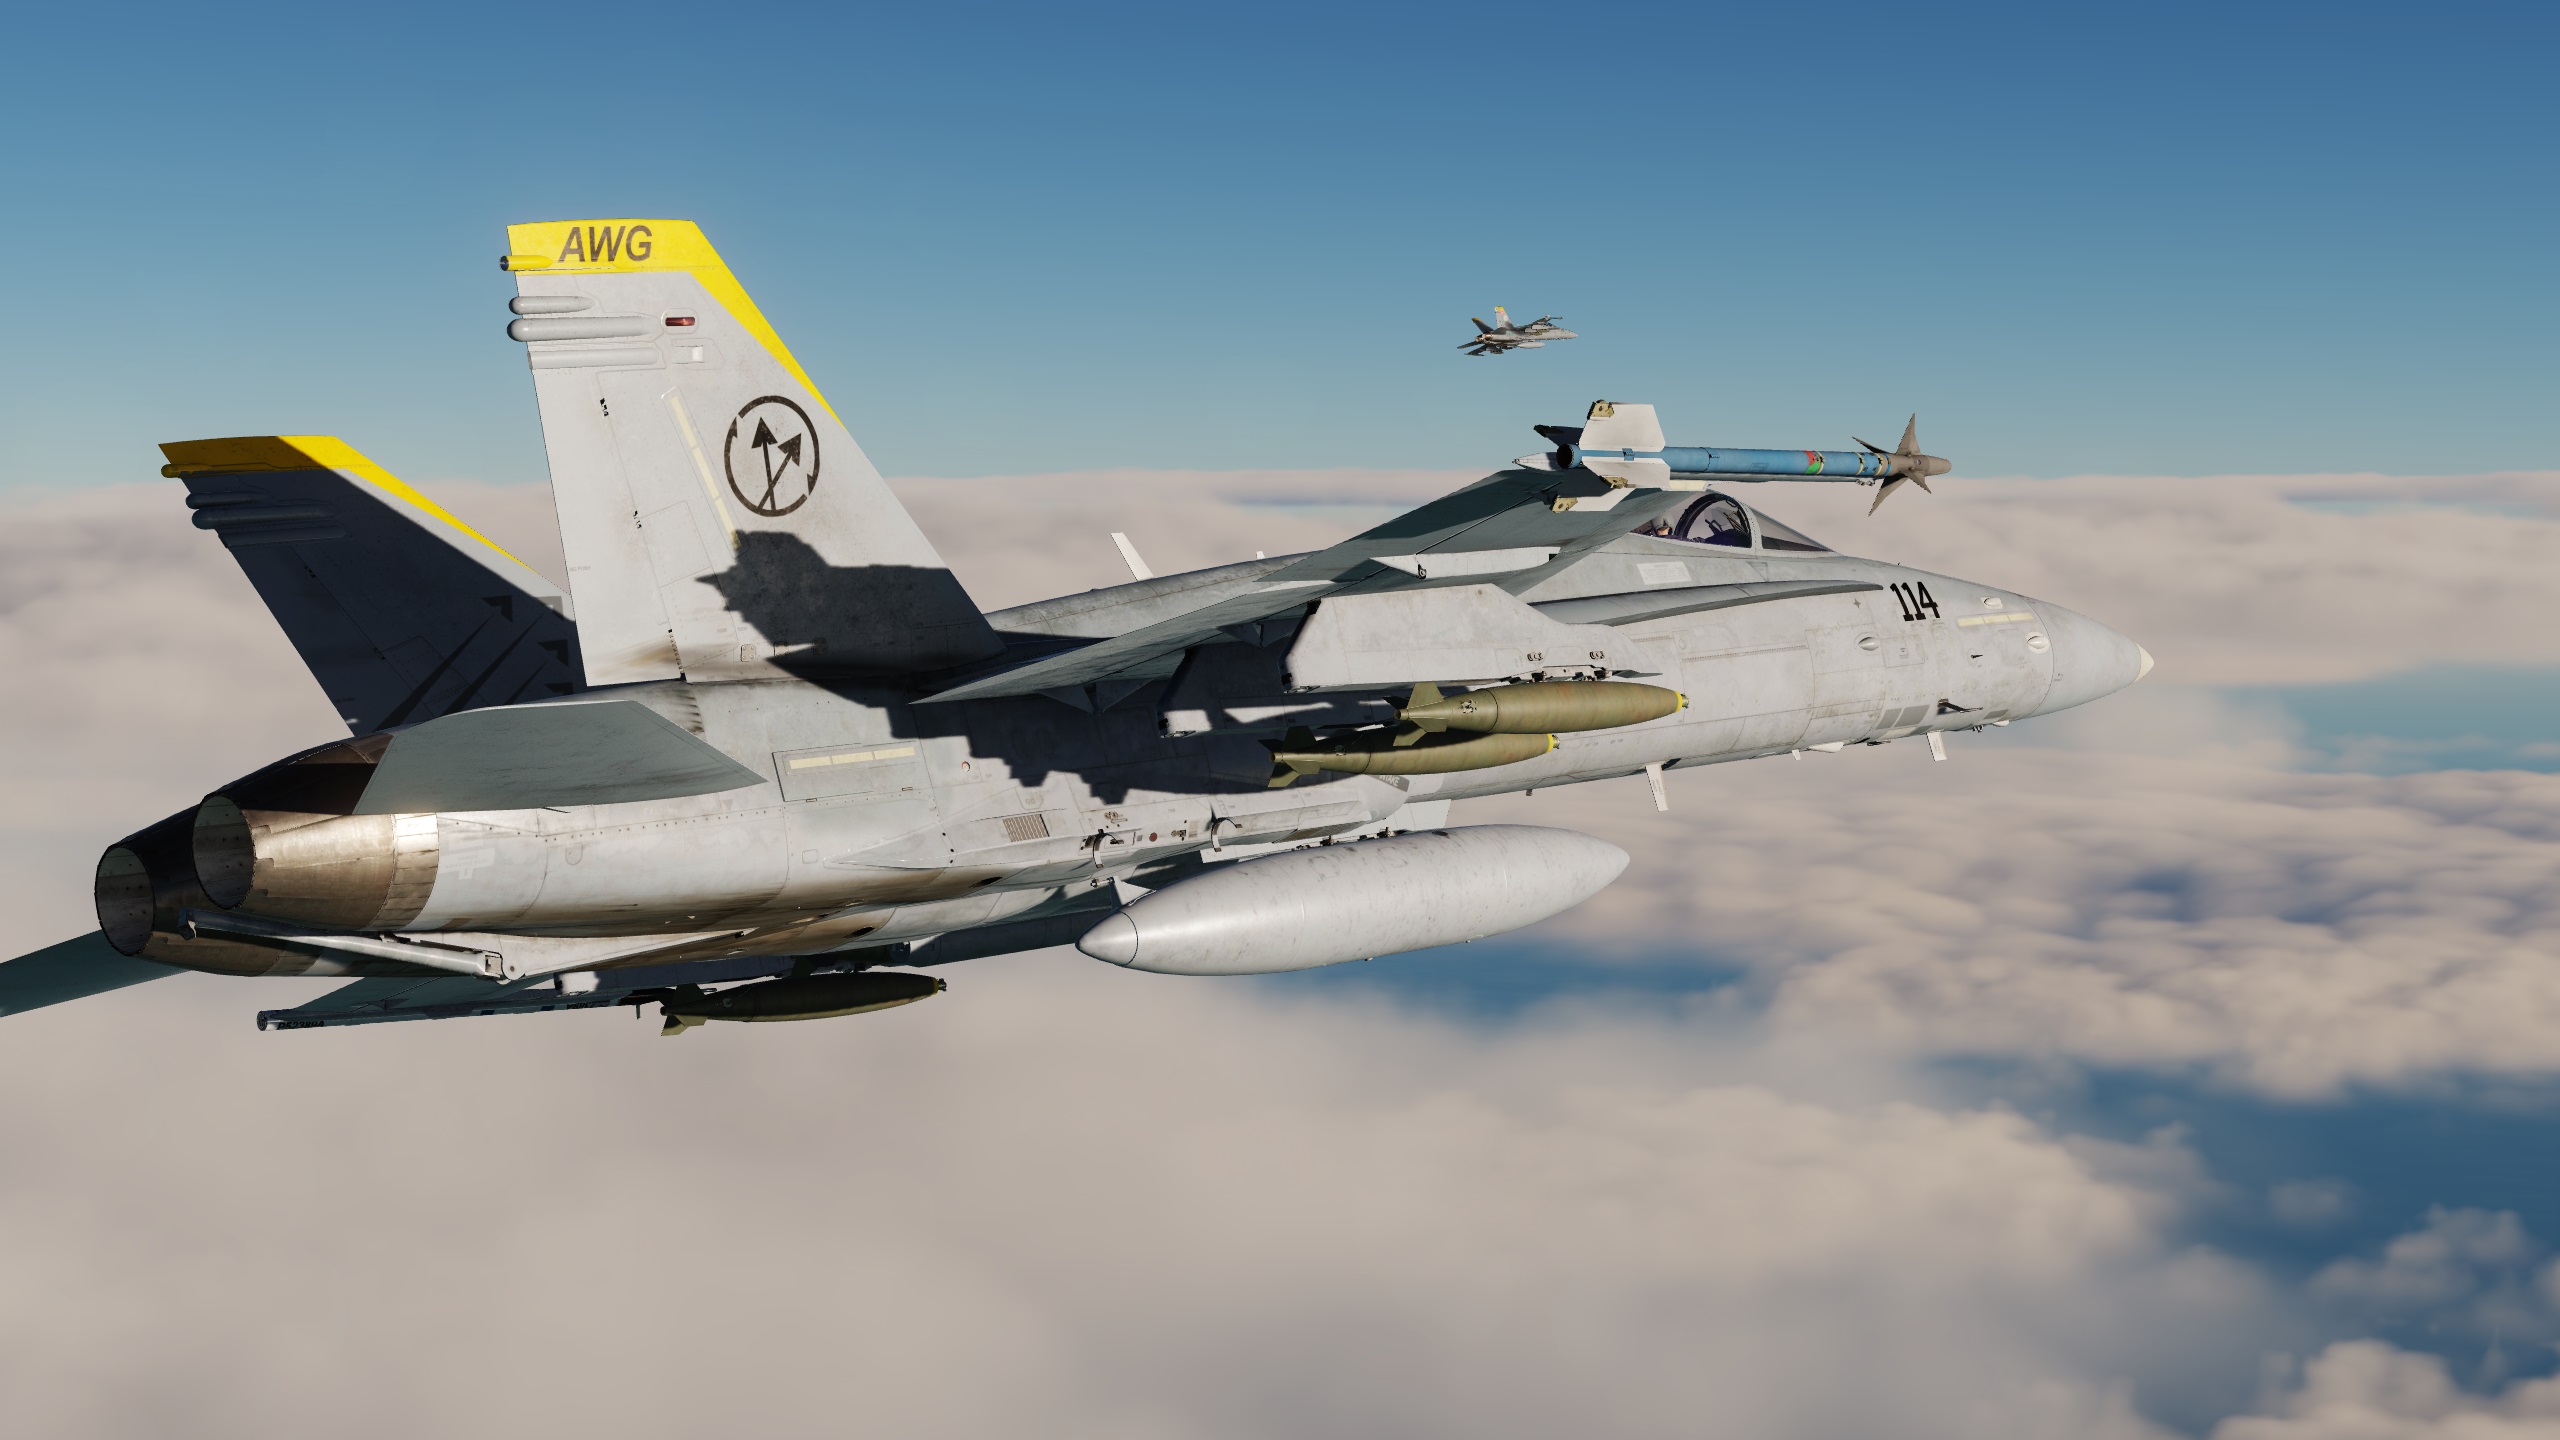 DCS SYRIA AIR TO GROUND WEAPONS RANGE WITH SUPER-CARRIER AND HORNET BY  THE AIR WARFARE GROUP